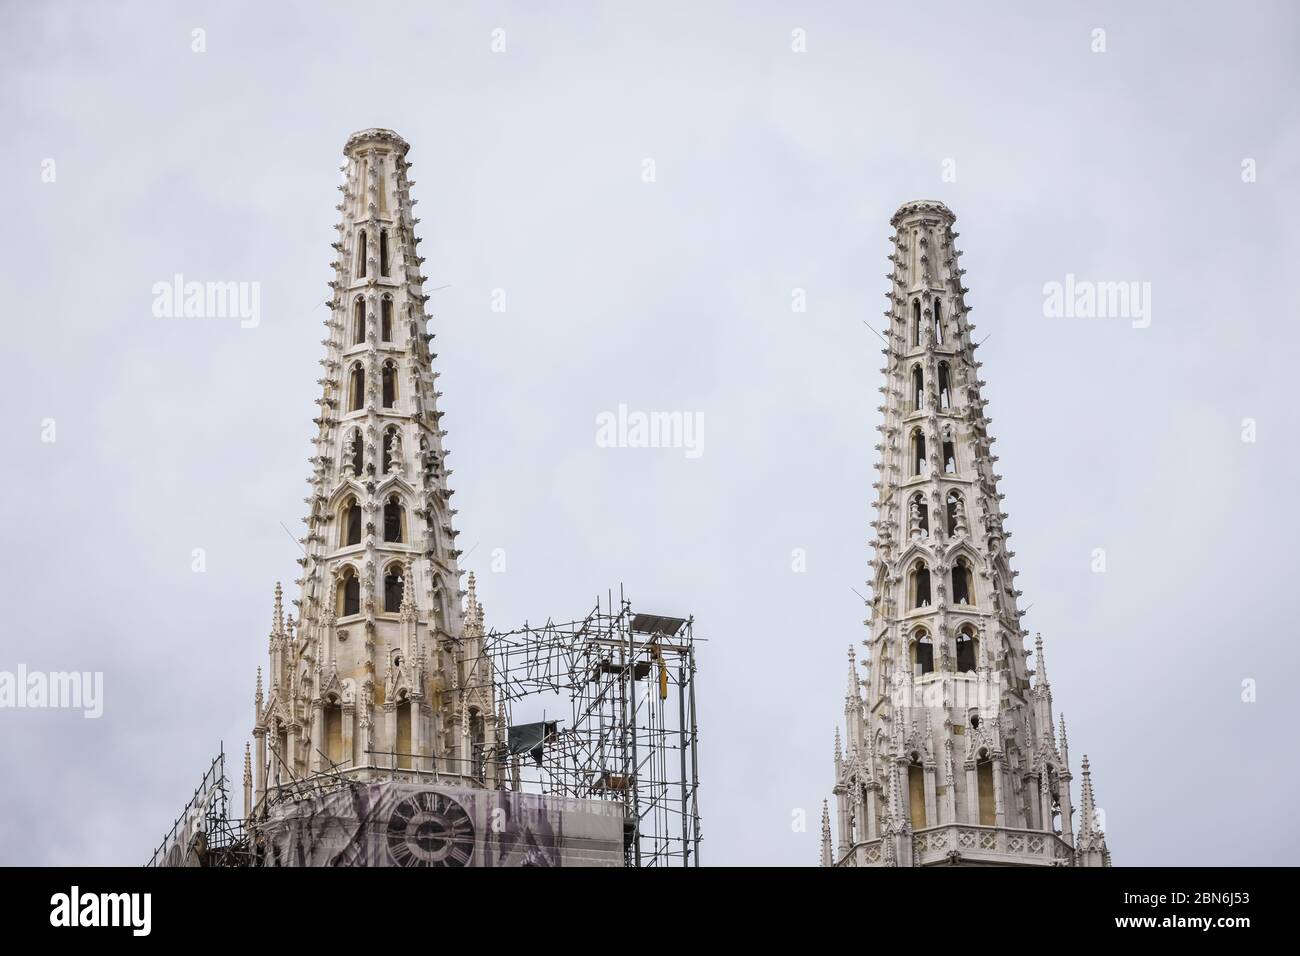 Zagreb, Croatia - 15 April, 2020 : The Zagreb cathedral without both crosses on the top of the towers after earthquake that have damage it in Zagreb, Stock Photo